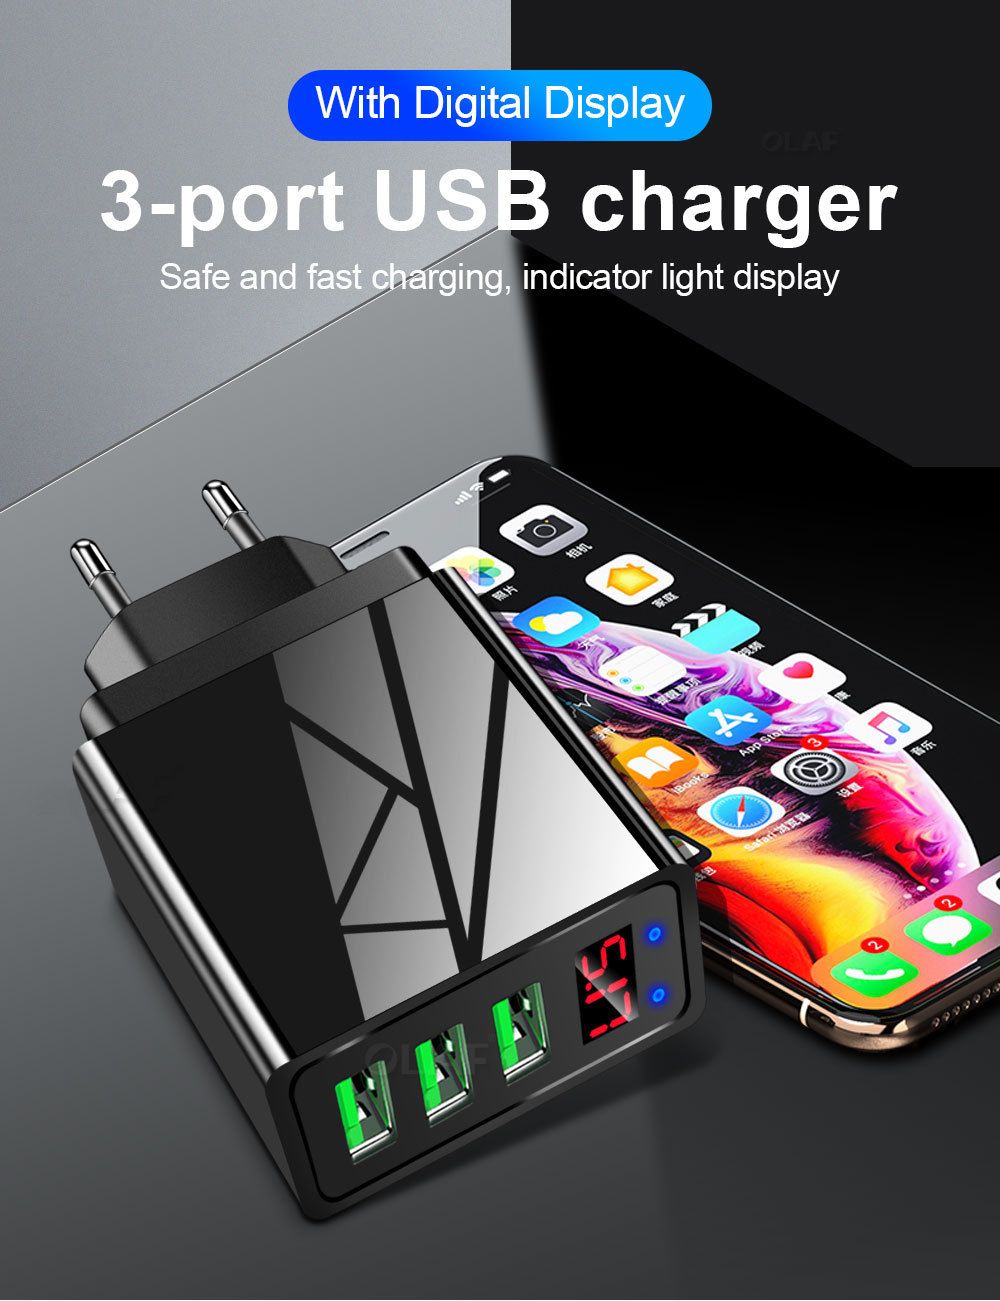 Gragas-Mobile-Phone-Fast-Charger-Power-Adapter-Digital-Display-Lithium-Battery-Charger-3USB-Port-31A-1735945